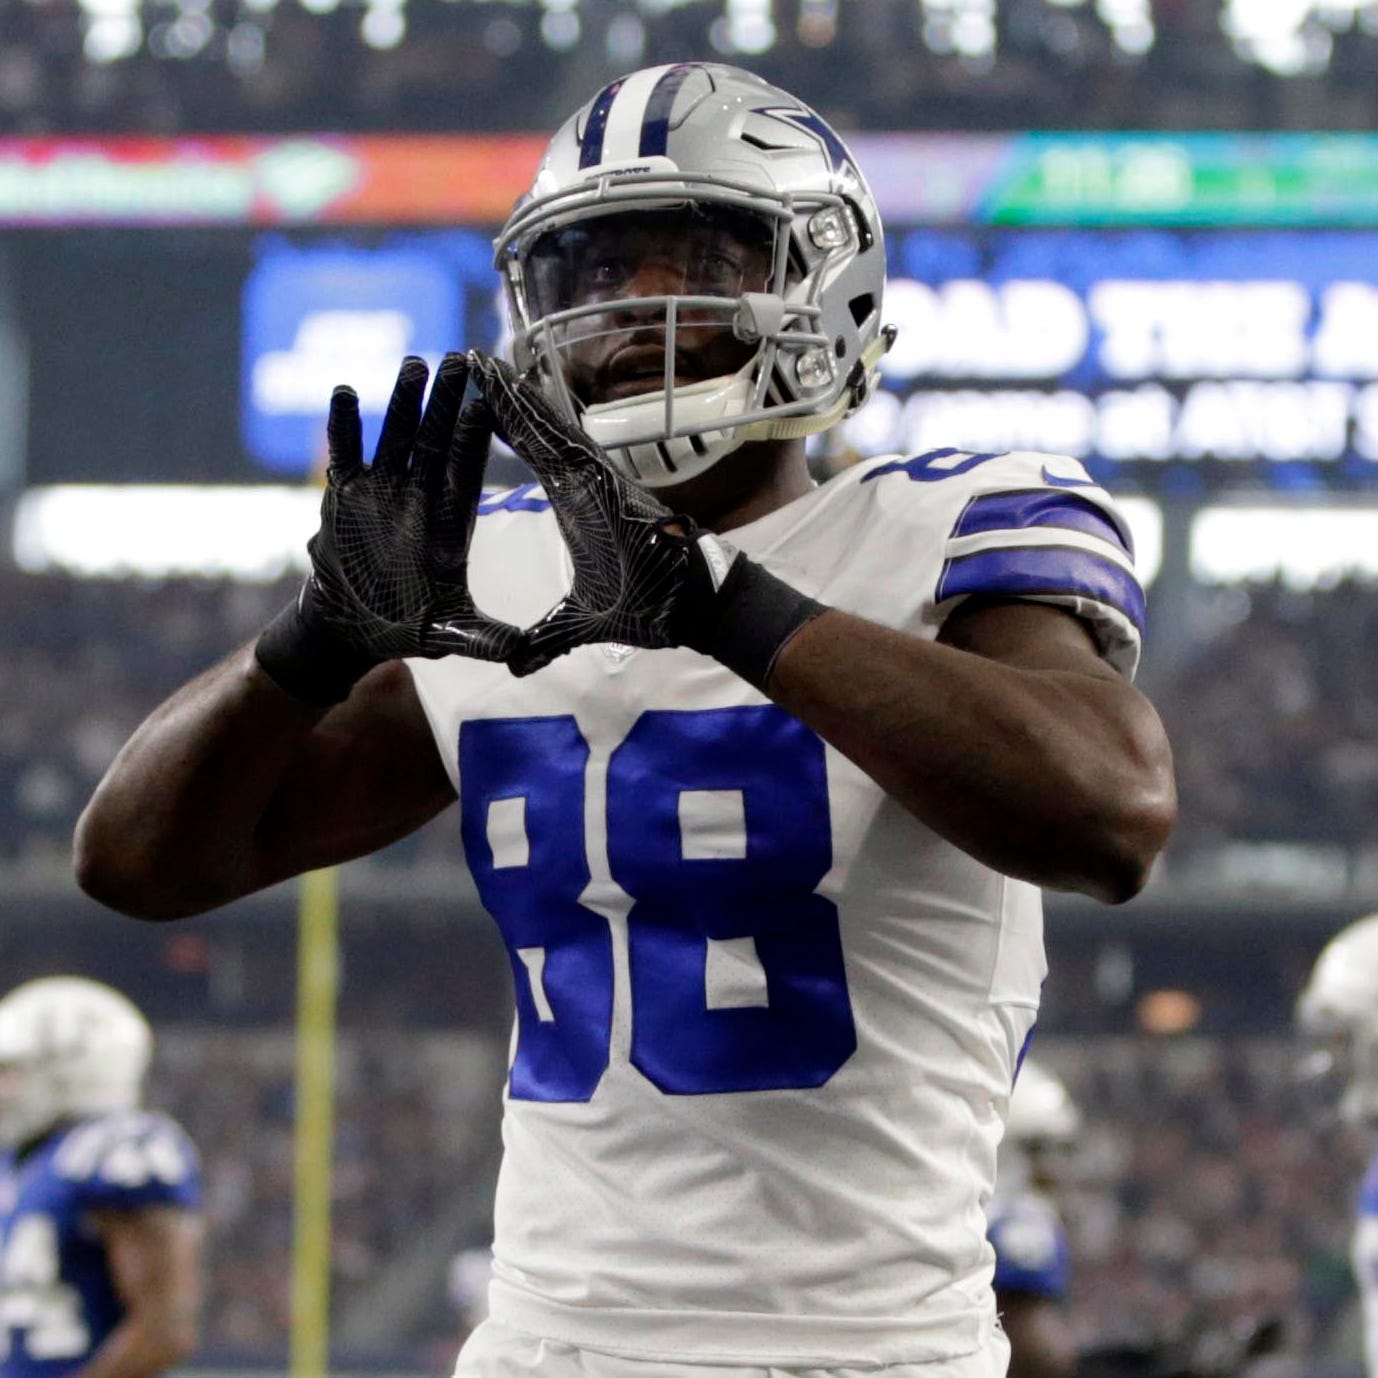 Dez Bryant has been without a team since the Cowboys released him in April.